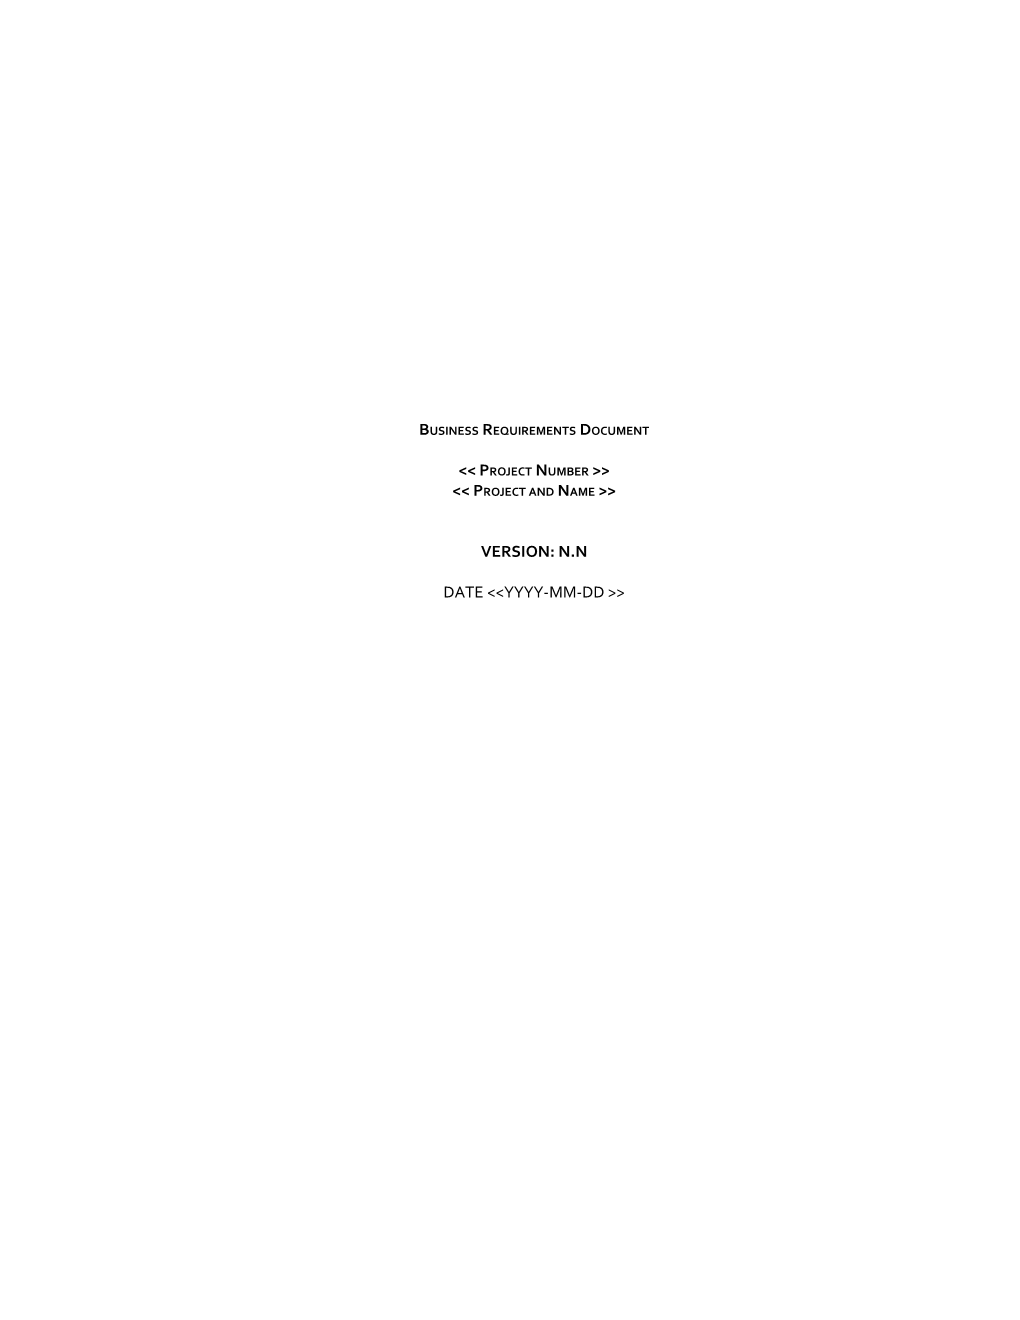 Business Requirements Document s1